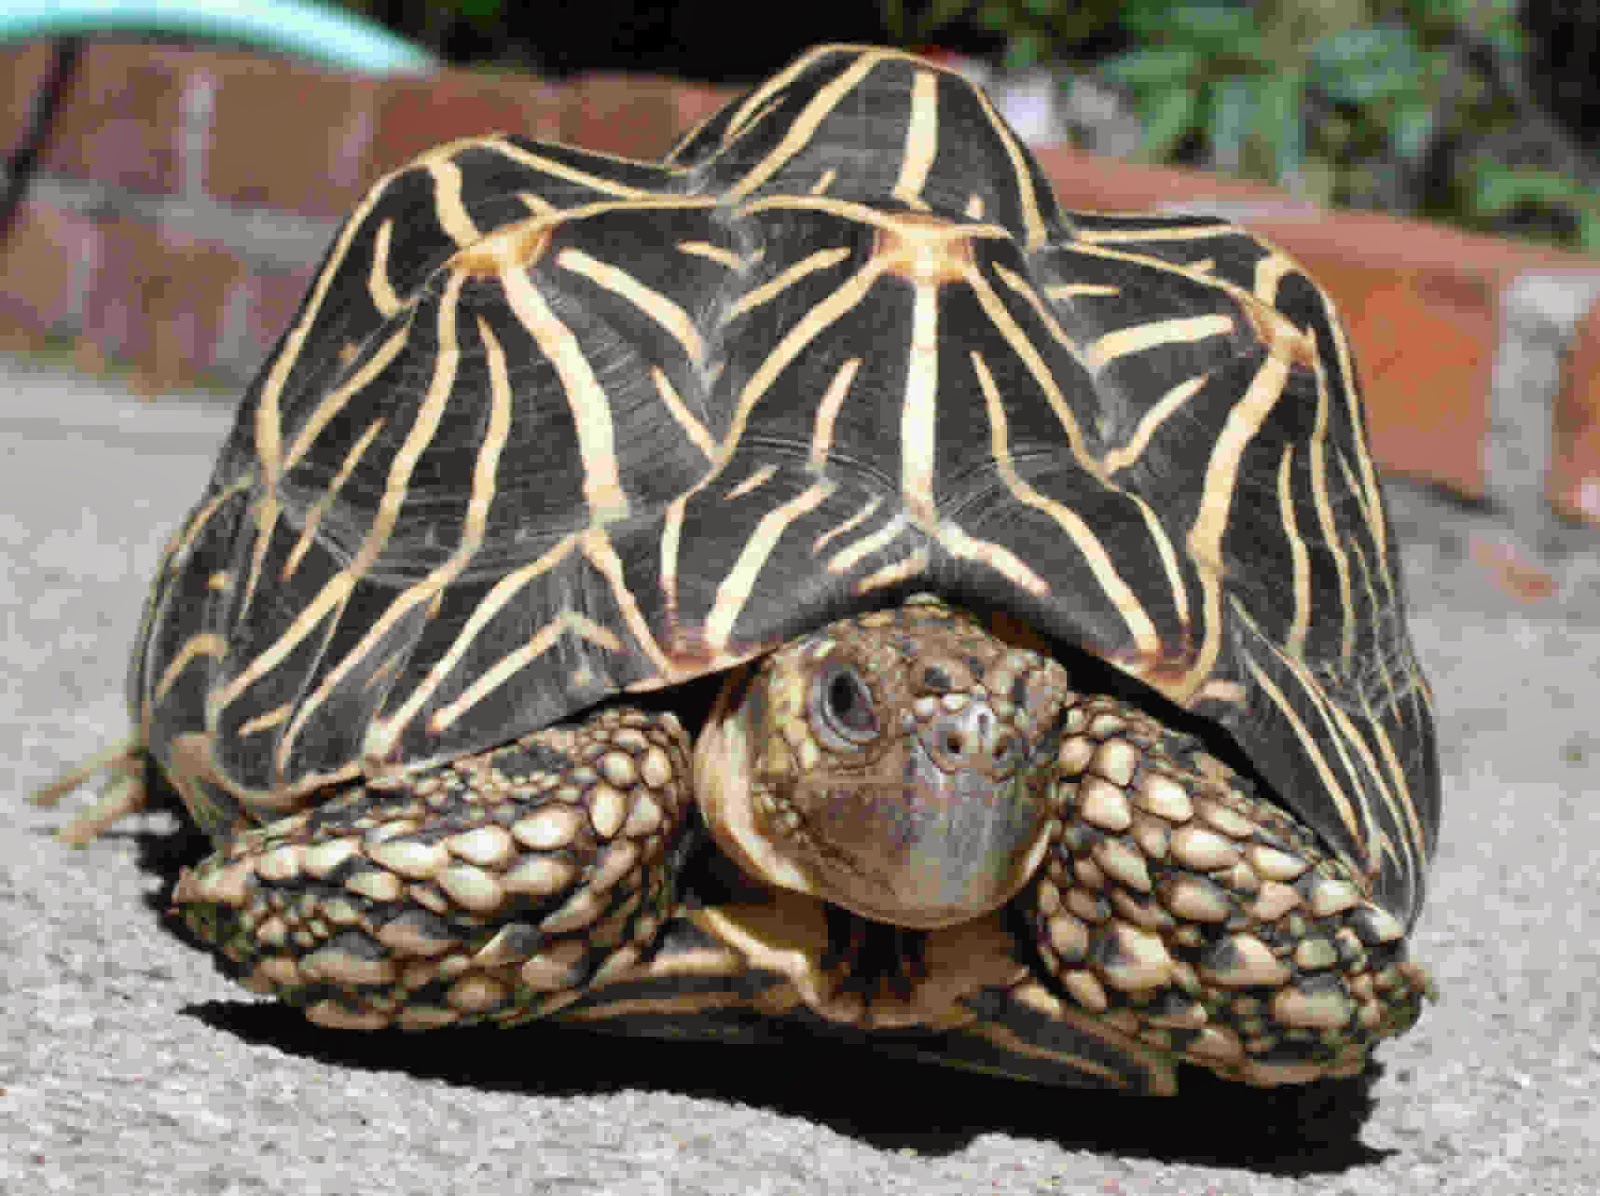 Indian Star Tortoise Backgrounds on Wallpapers Vista